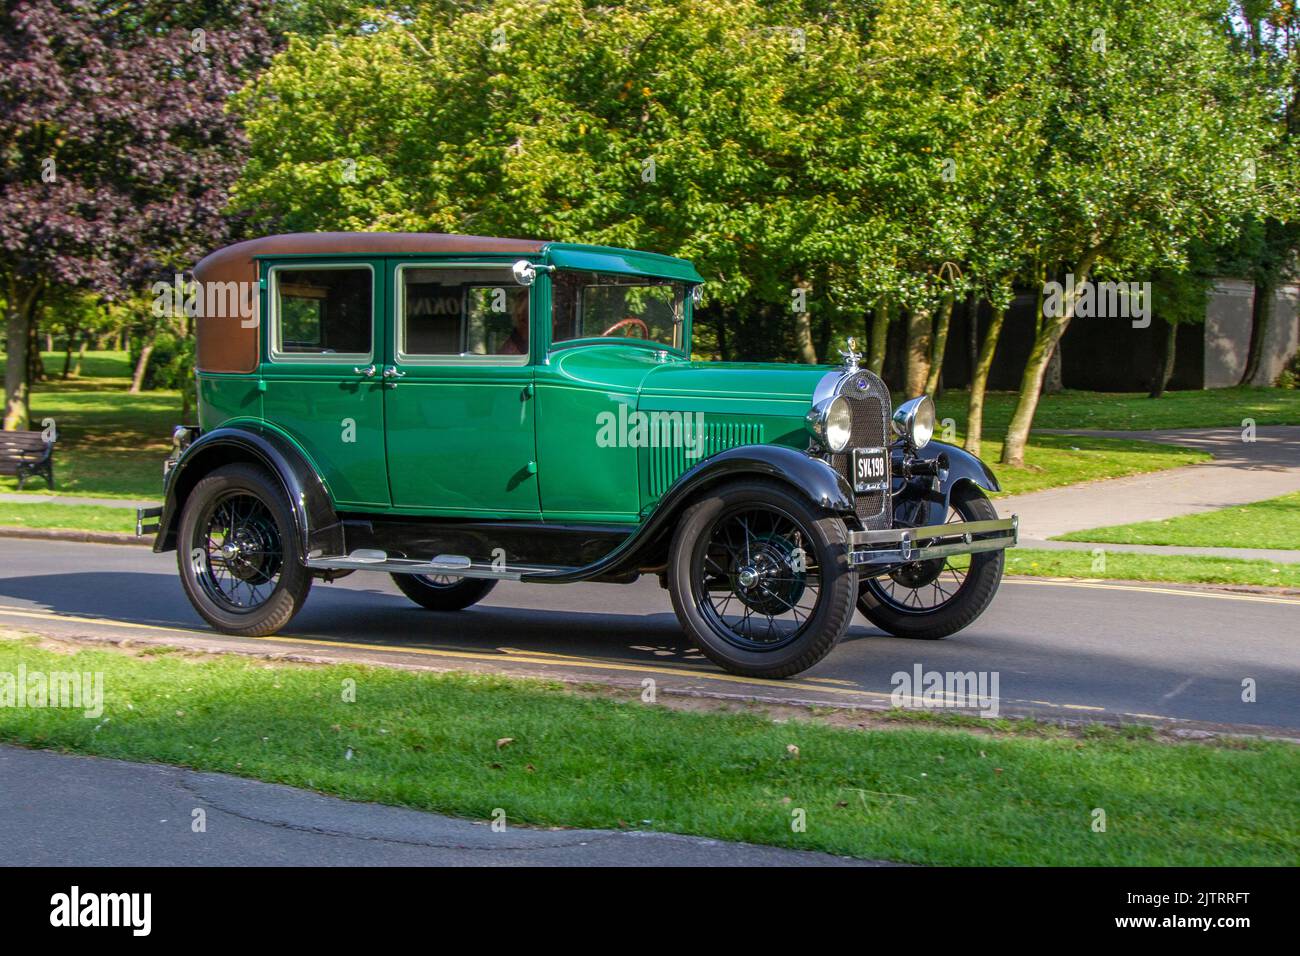 1928, 1920s, twenties pre-war Green Ford Sedan.  Ford Model A Phaeton; Cars arriving at the annual Stanley Park Classic Car Show. Stanley Park classics yesteryear Motor Show is hosted by Blackpool Vintage Vehicle Preservation Group, UK. Stock Photo